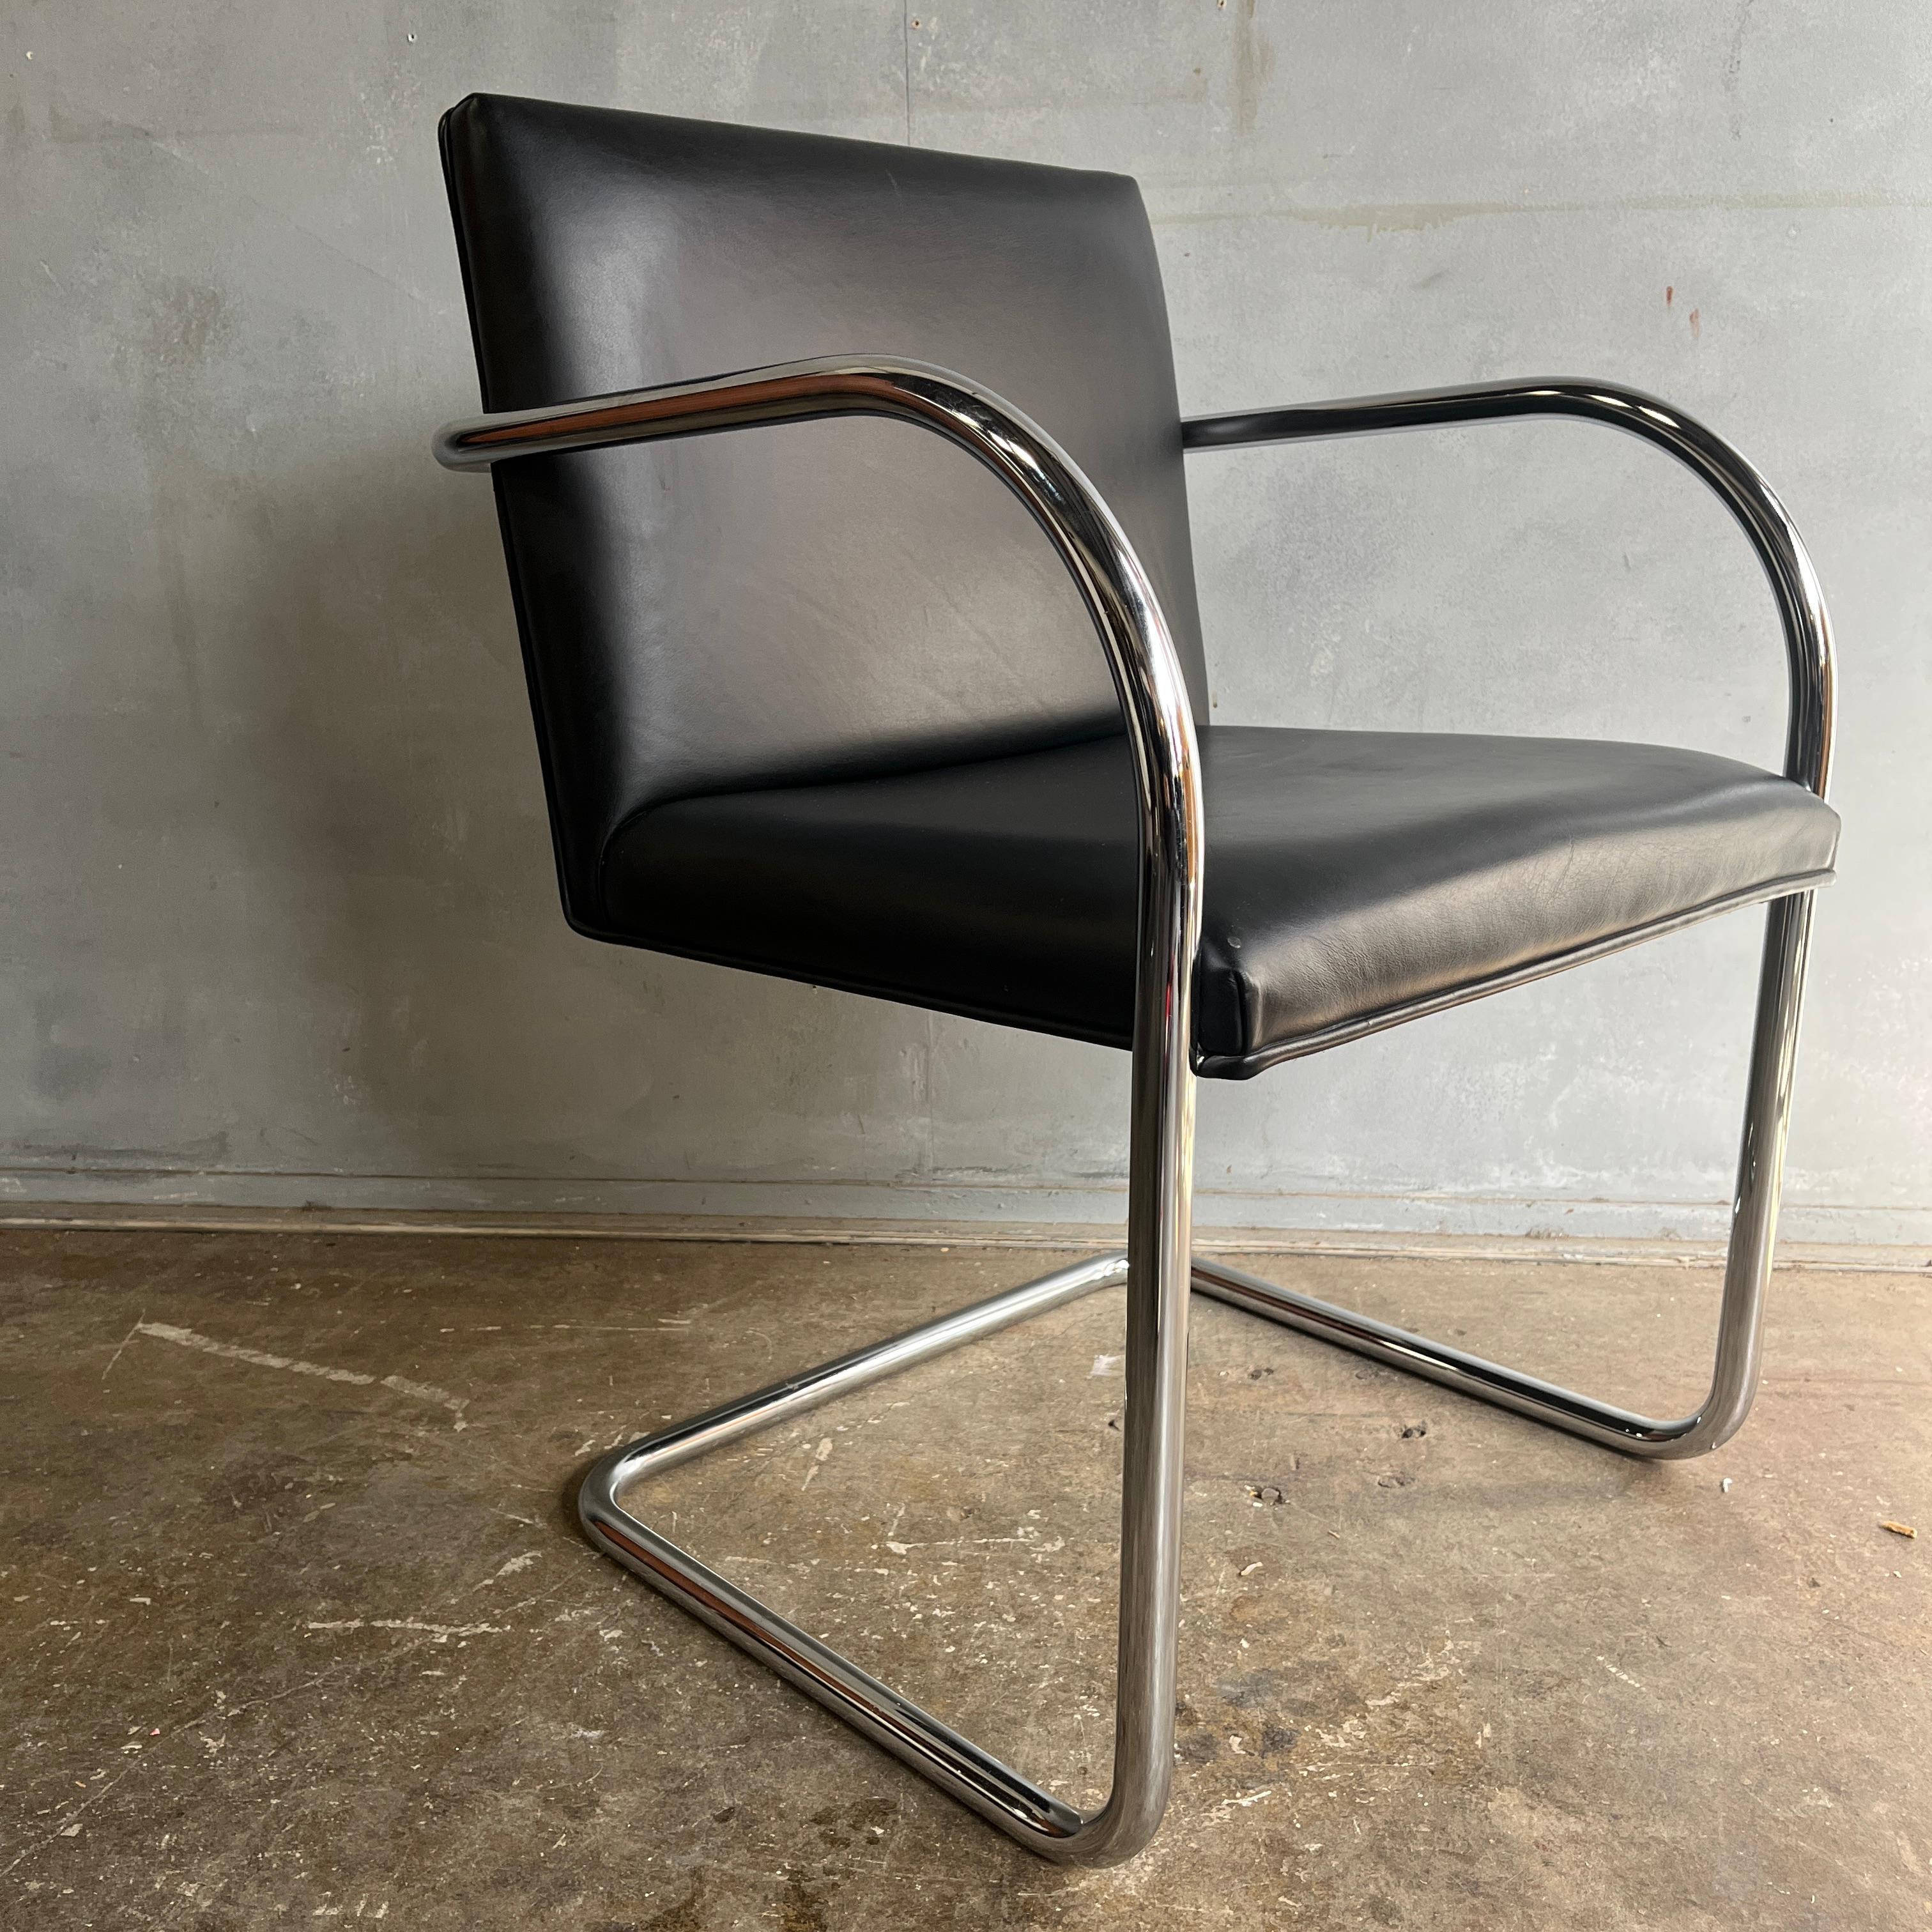 North American Midcentury Knoll Brno Chair by Mies Van Der Rohe